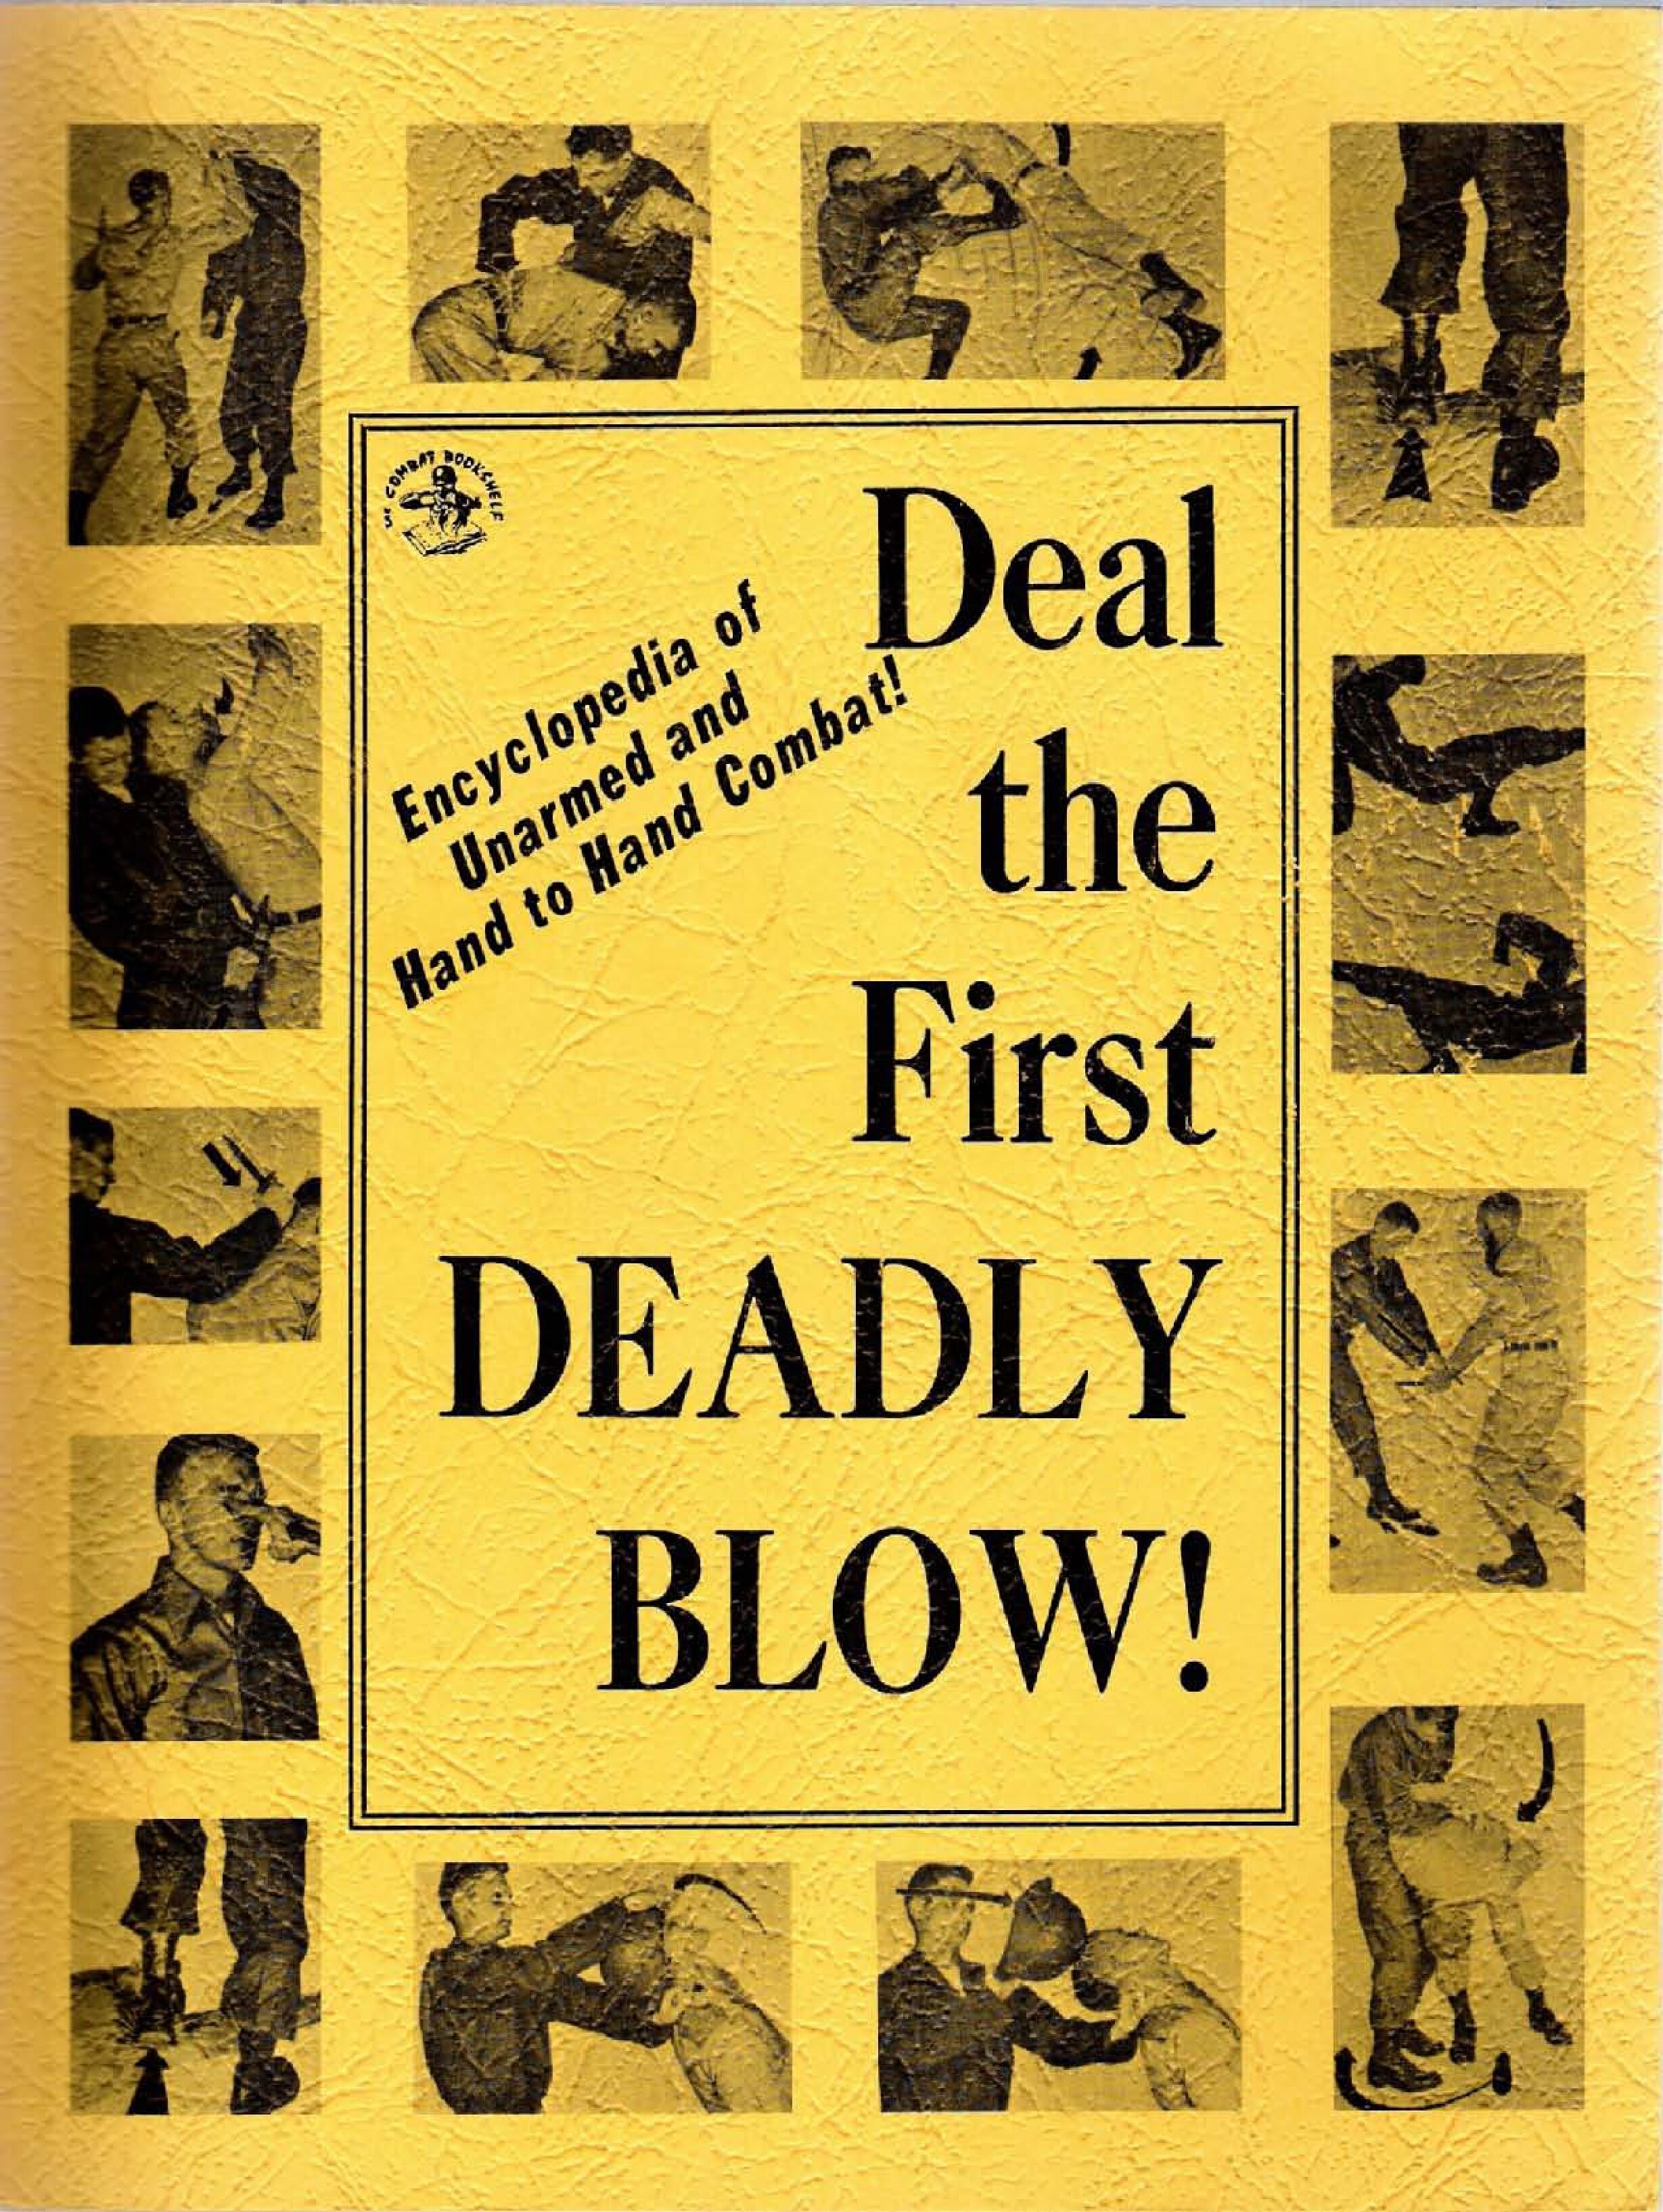 FM 21-150 Hand to Hand Combat 1971 (Deal the First Deadly Blow)